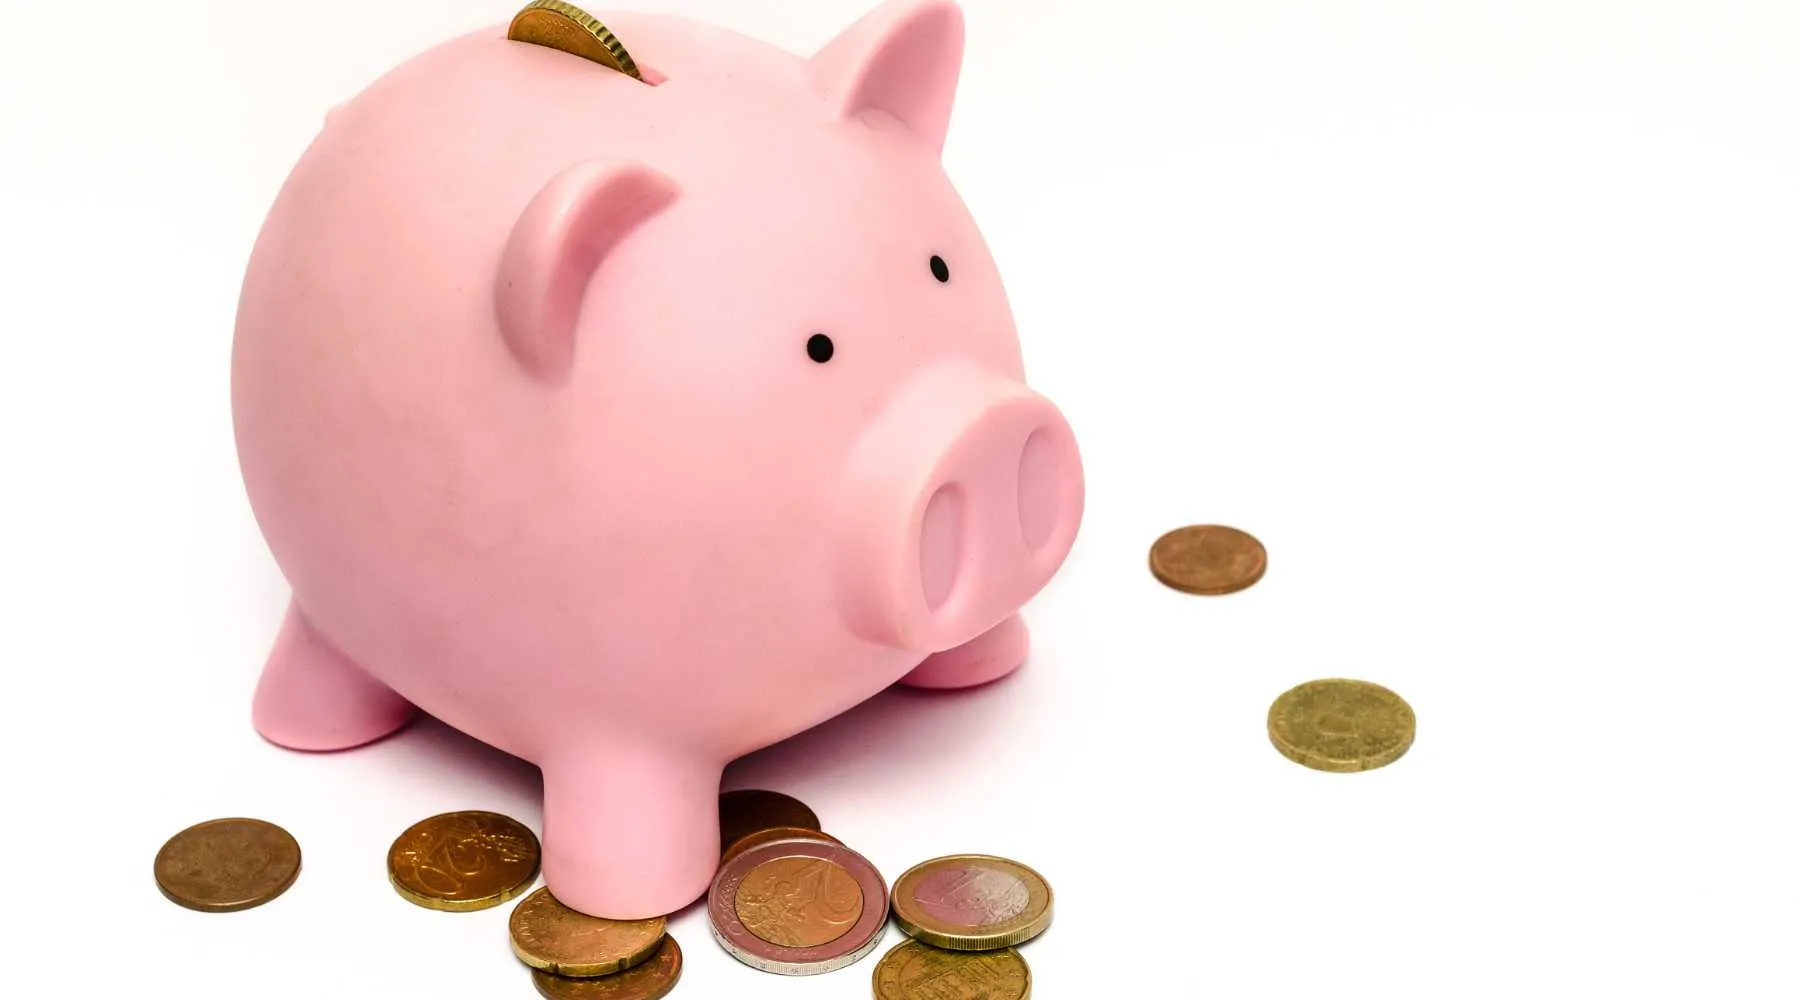 Piggy Bank With Coins_Canva_1800x1000